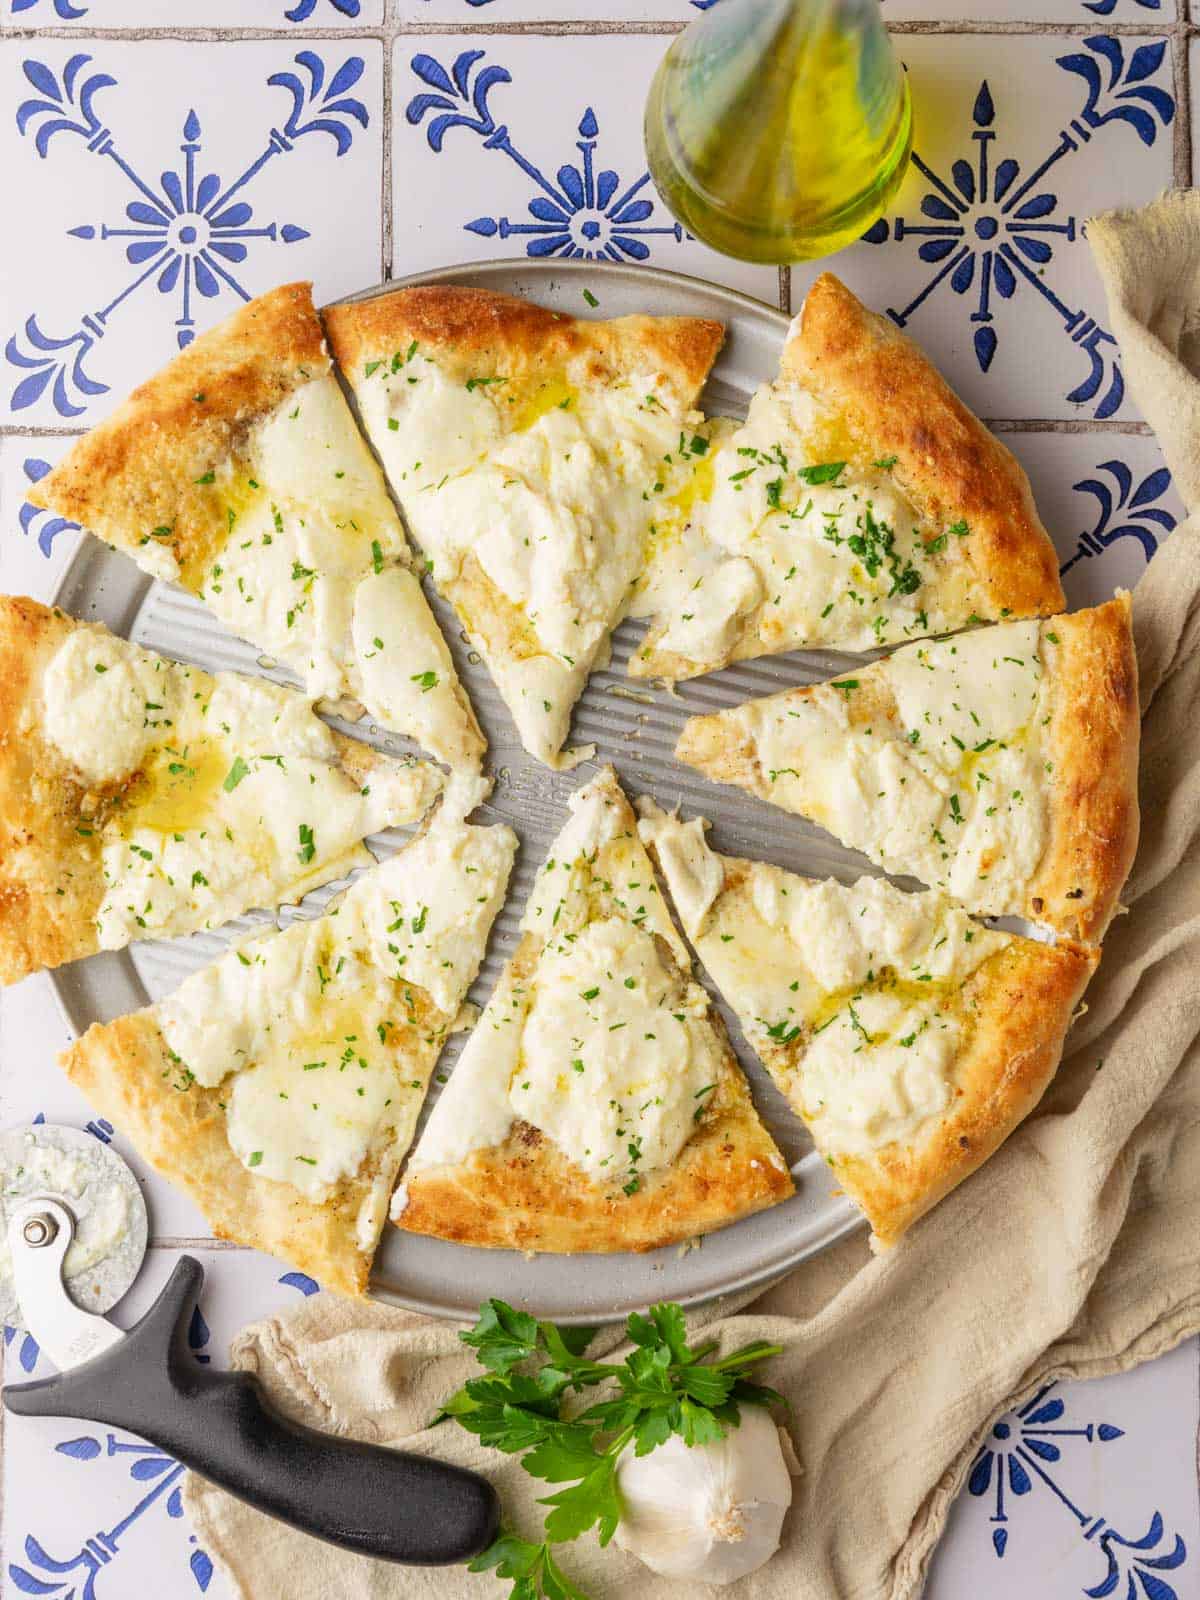 white pizza cut in slices with olive oil and garlic sauce, with melted cheese and chopped fresh parsley on top.